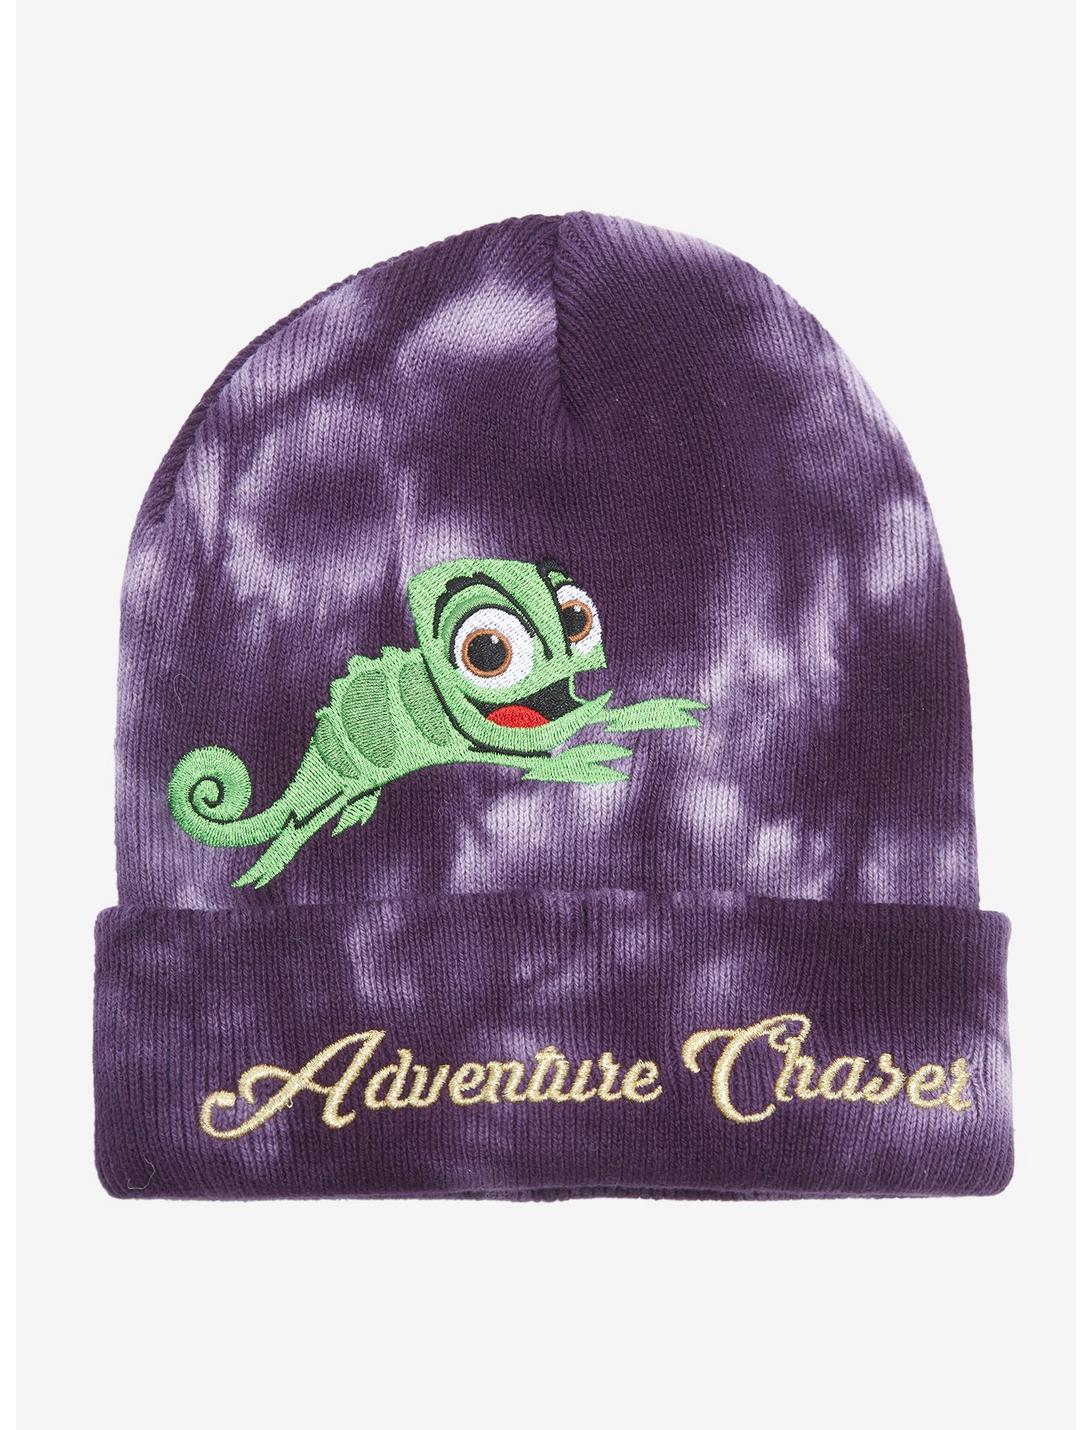 Disney Tangled Pascal Adventure Chaser Beanie, , hi-res